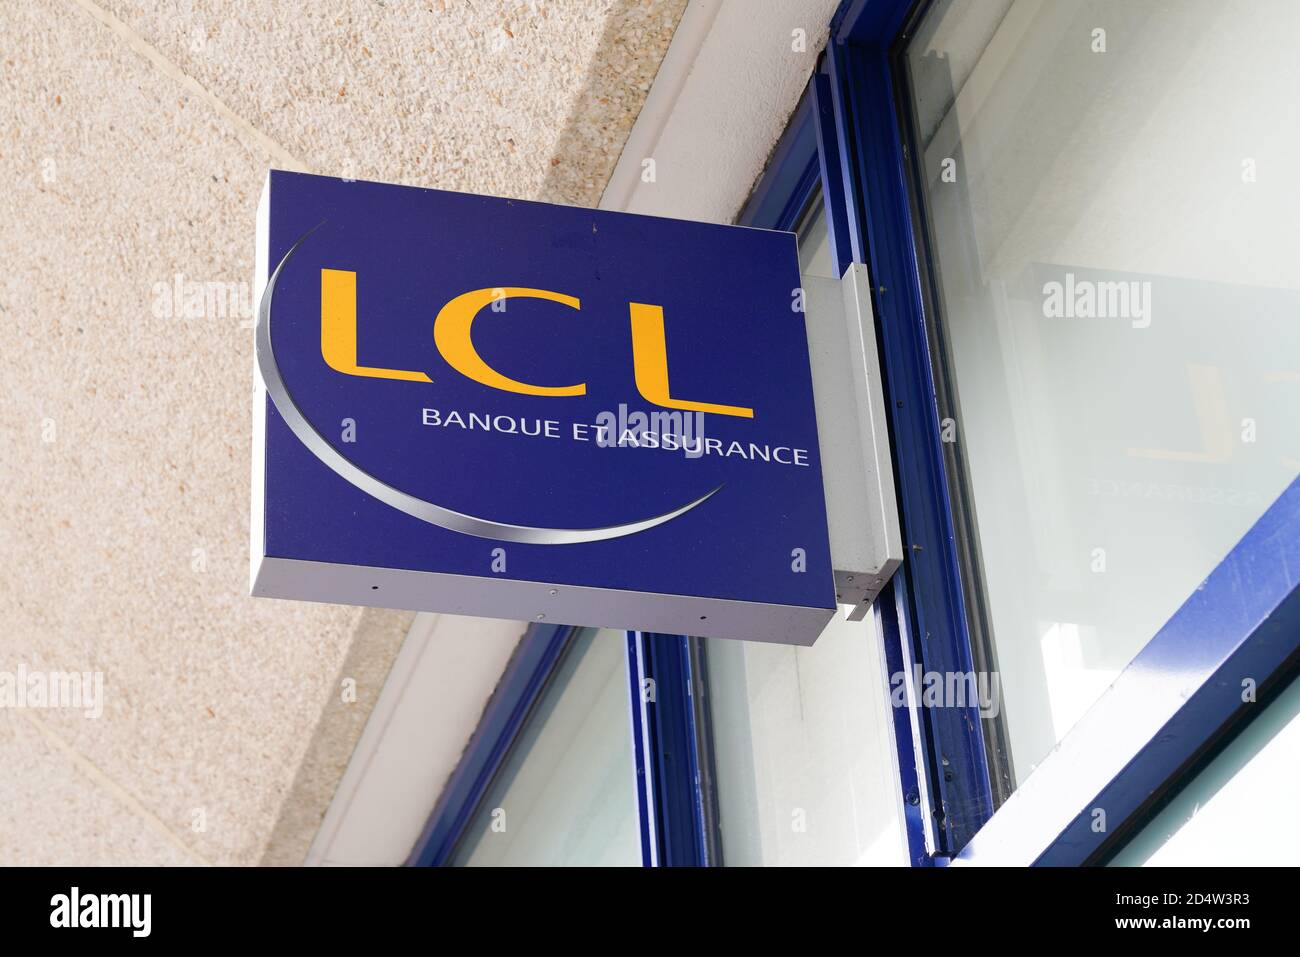 Bordeaux , Aquitaine / France - 10 01 2020 : lcl logo and sign of le credit Lyonnais text Banque et assurance french bank and insurance signage Stock Photo